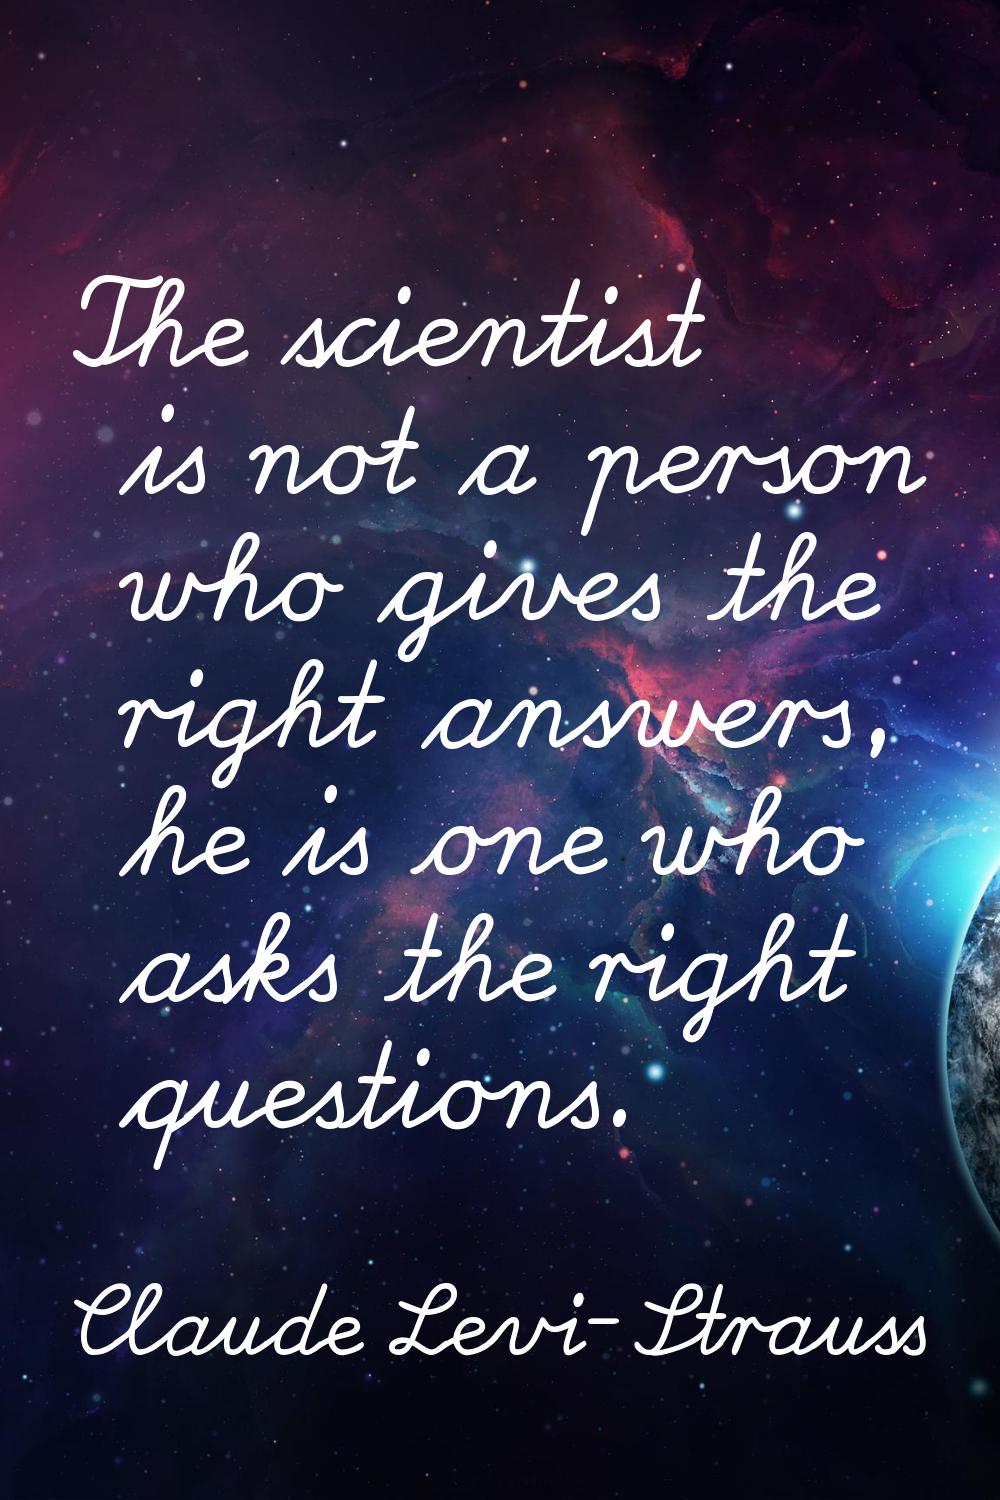 The scientist is not a person who gives the right answers, he is one who asks the right questions.